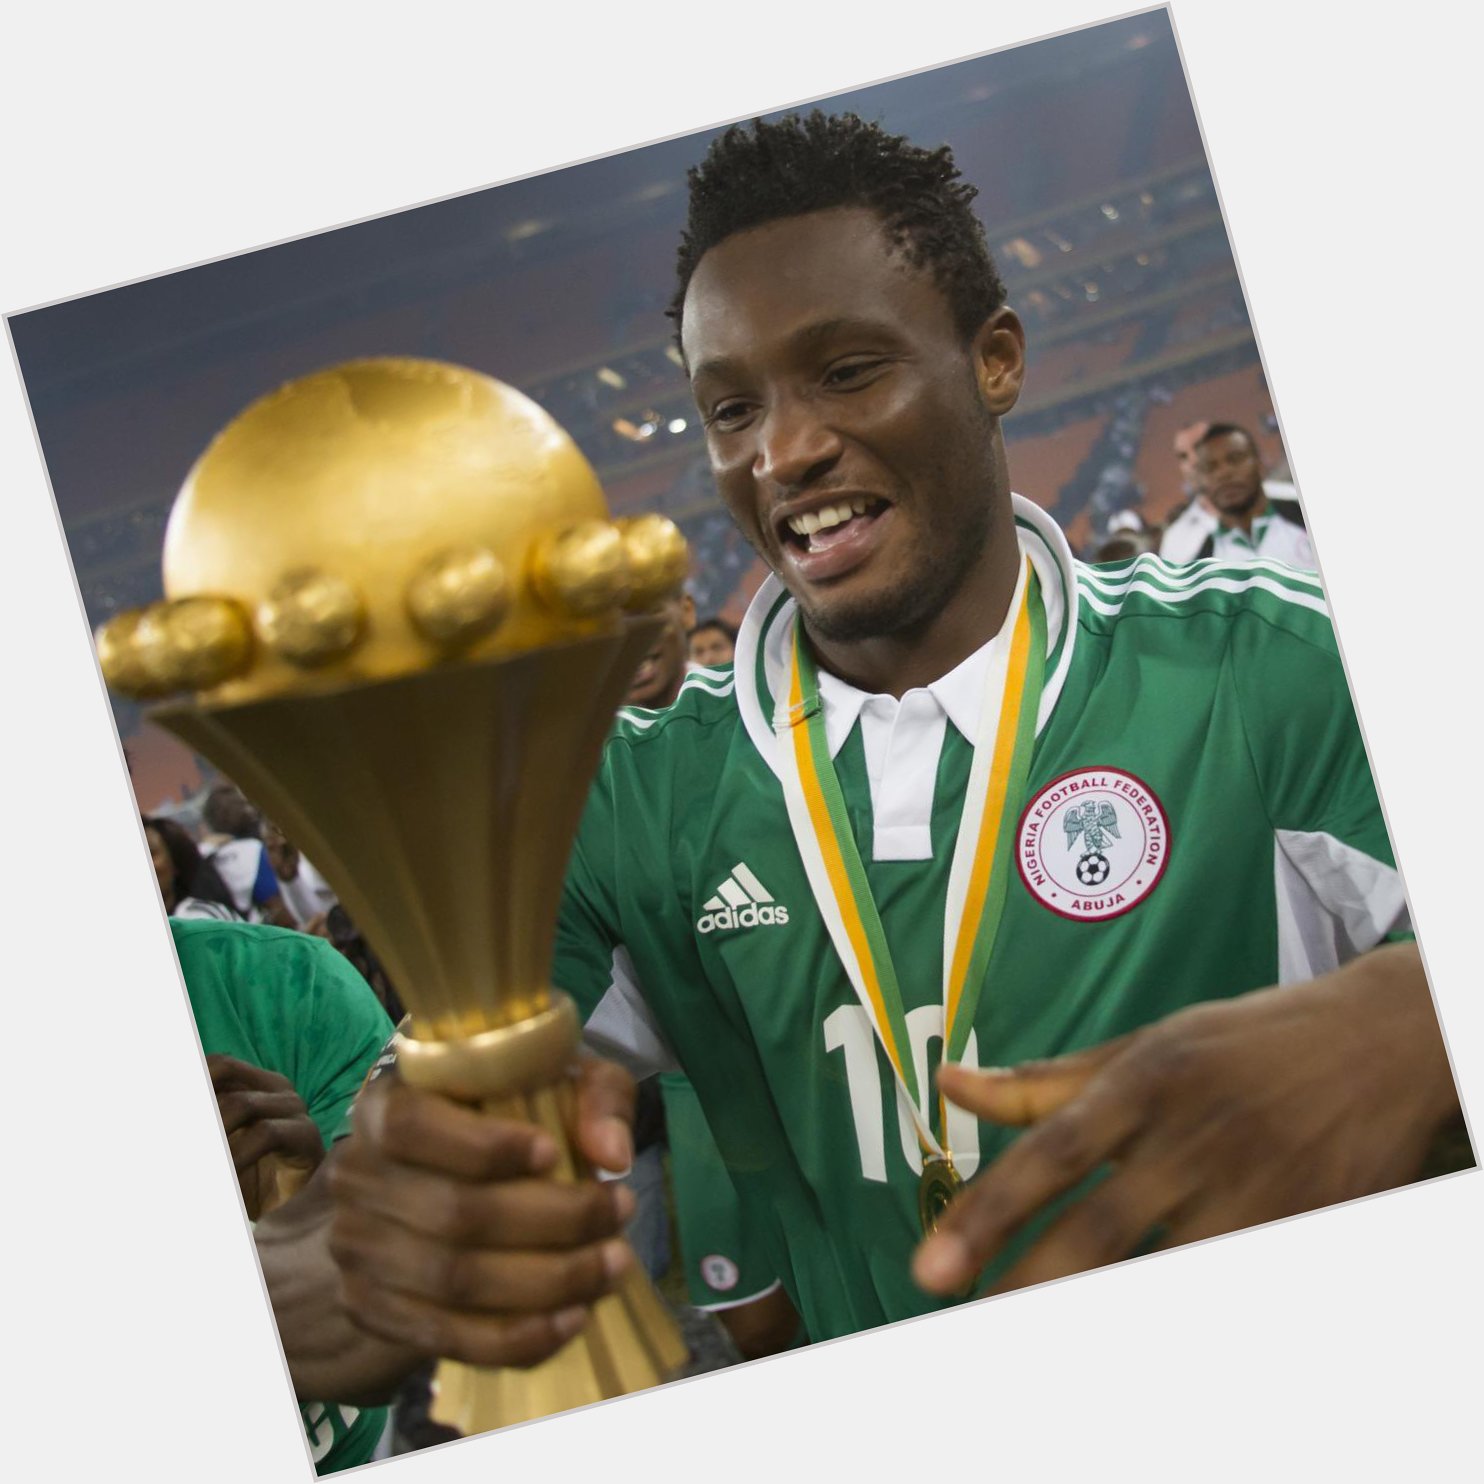 Happy Birthday to former  Super Eagles captain John Mikel Obi. 

What fond memories of him do you have? 